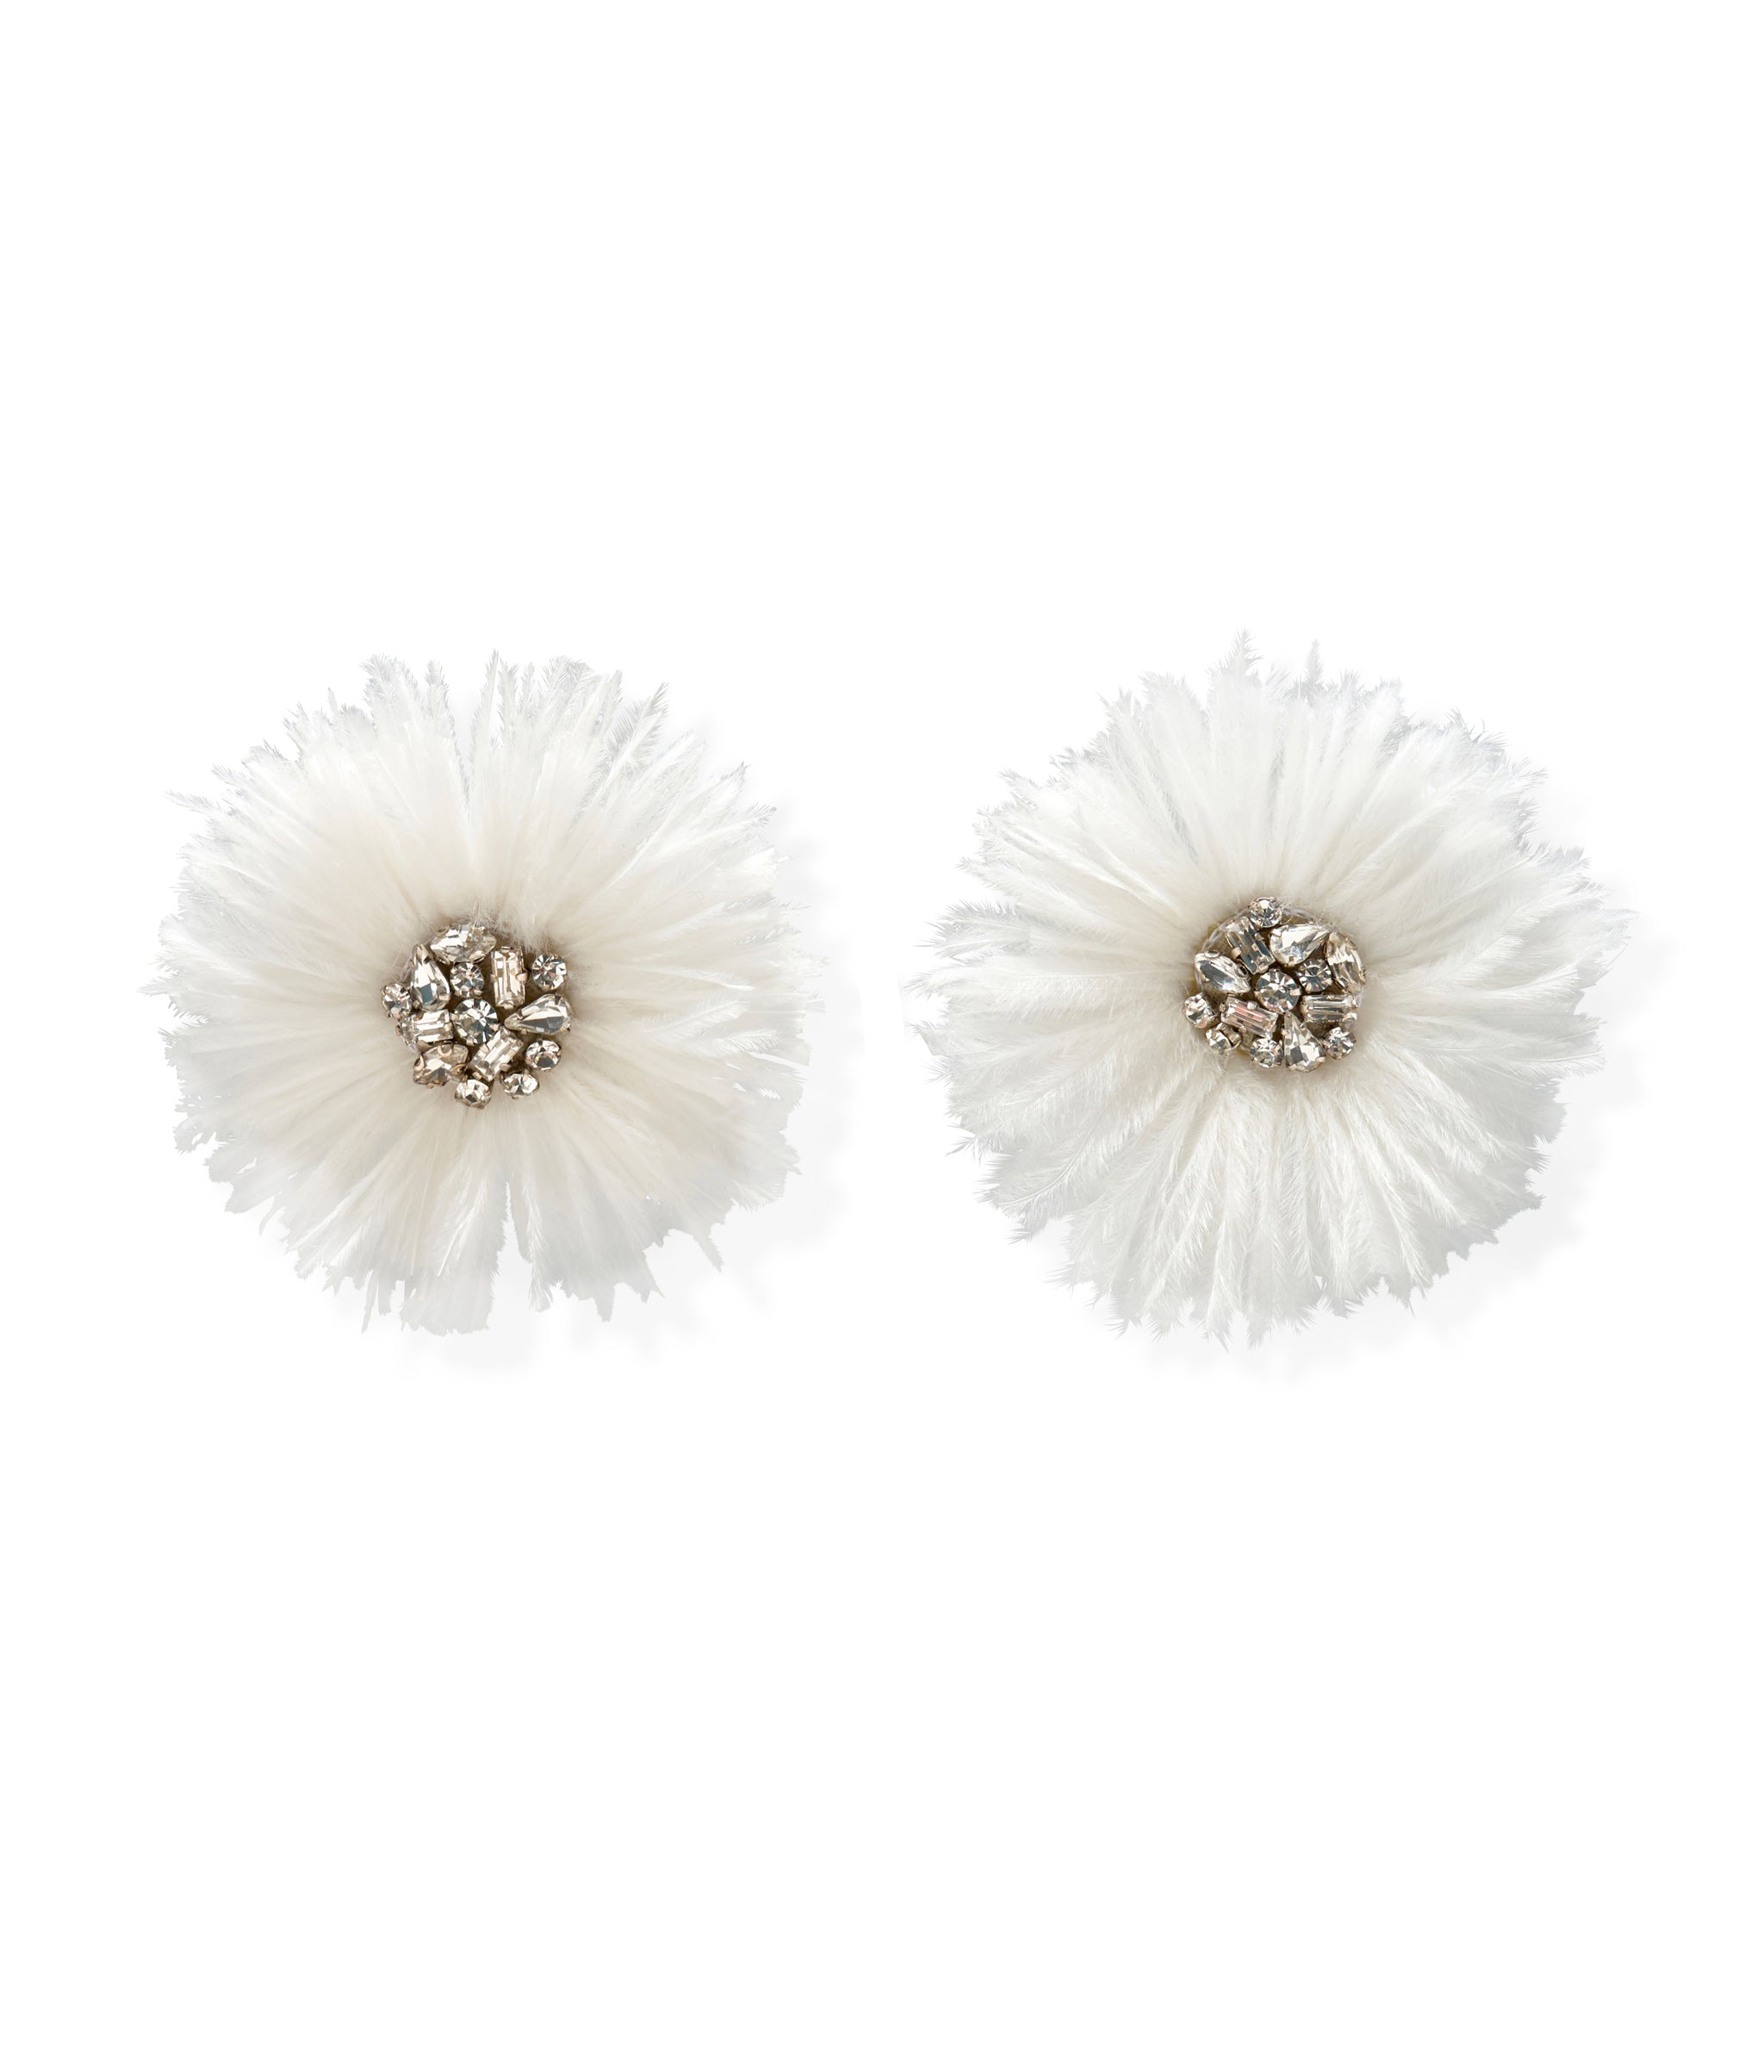 Plume Earrings in White. Stud earrings with sparkling crystals surrounded by lush white ostrich feathers.